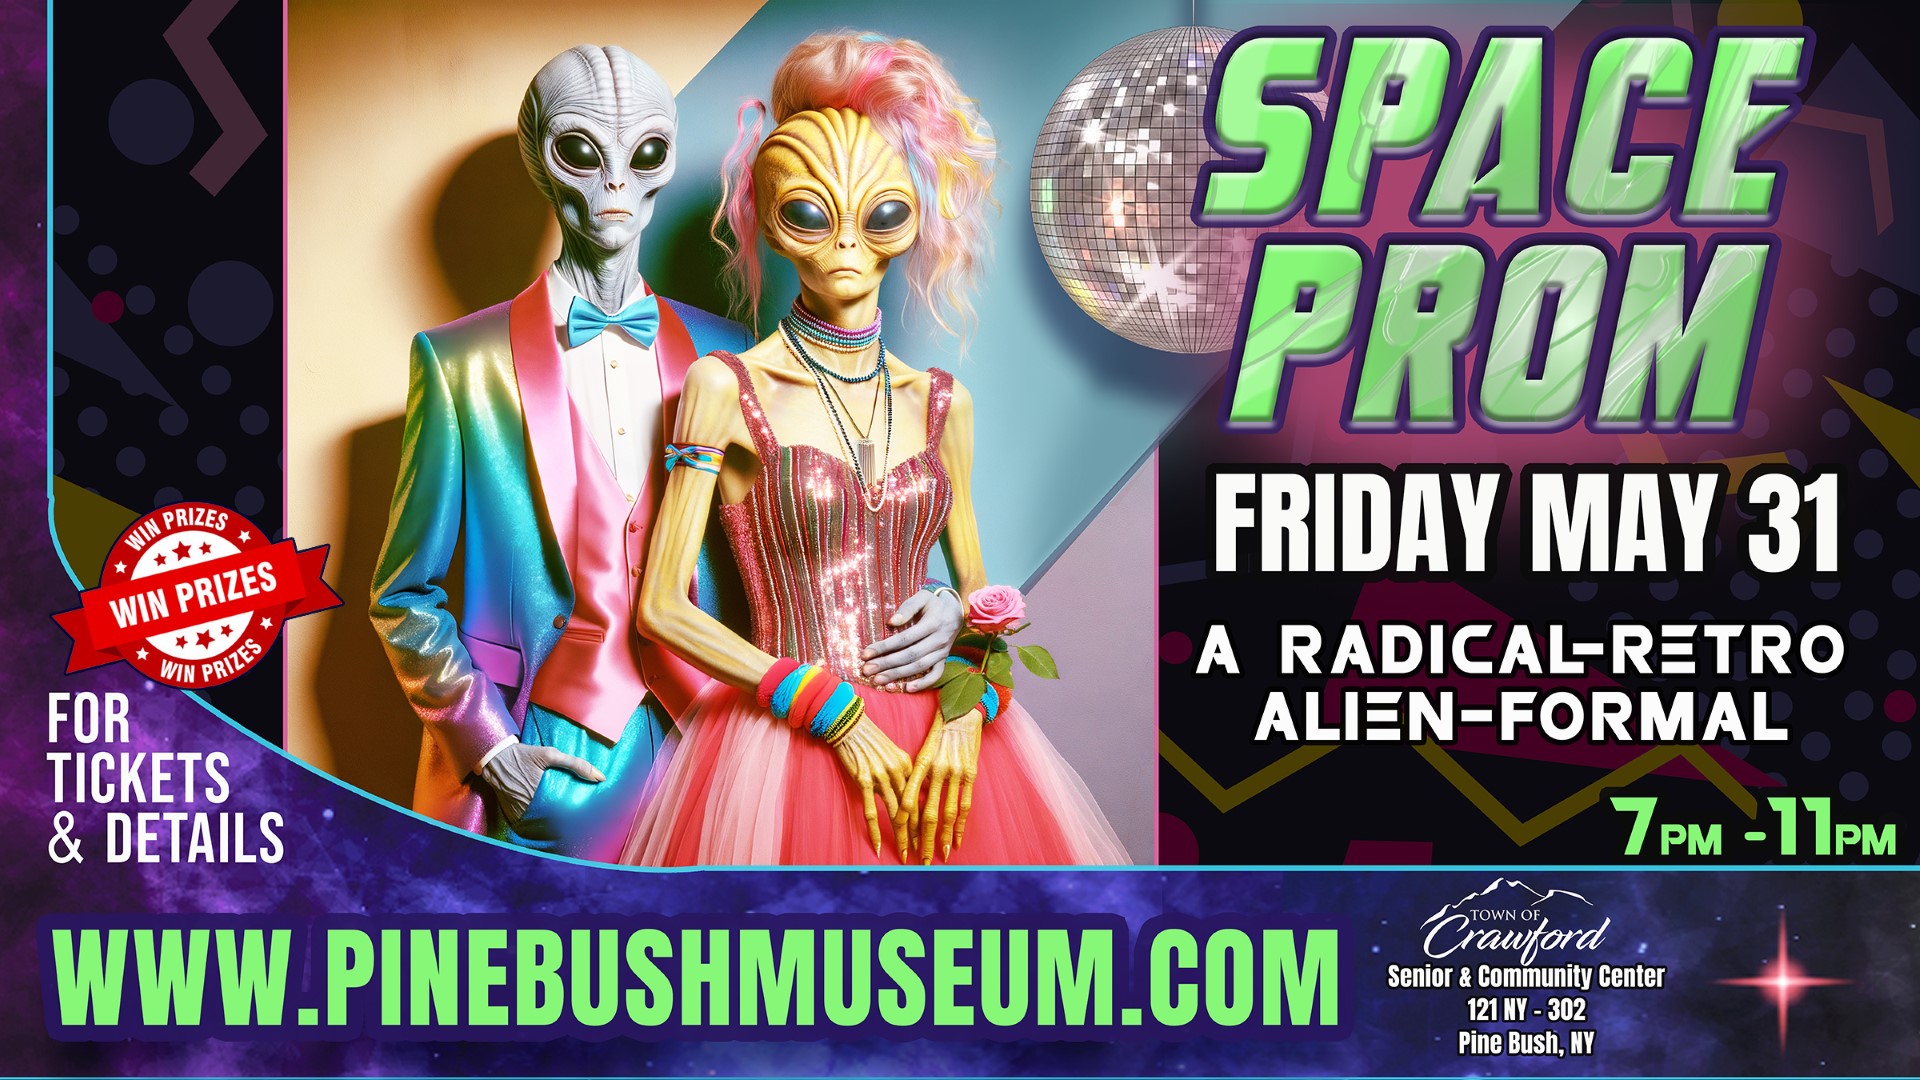 Space Prom